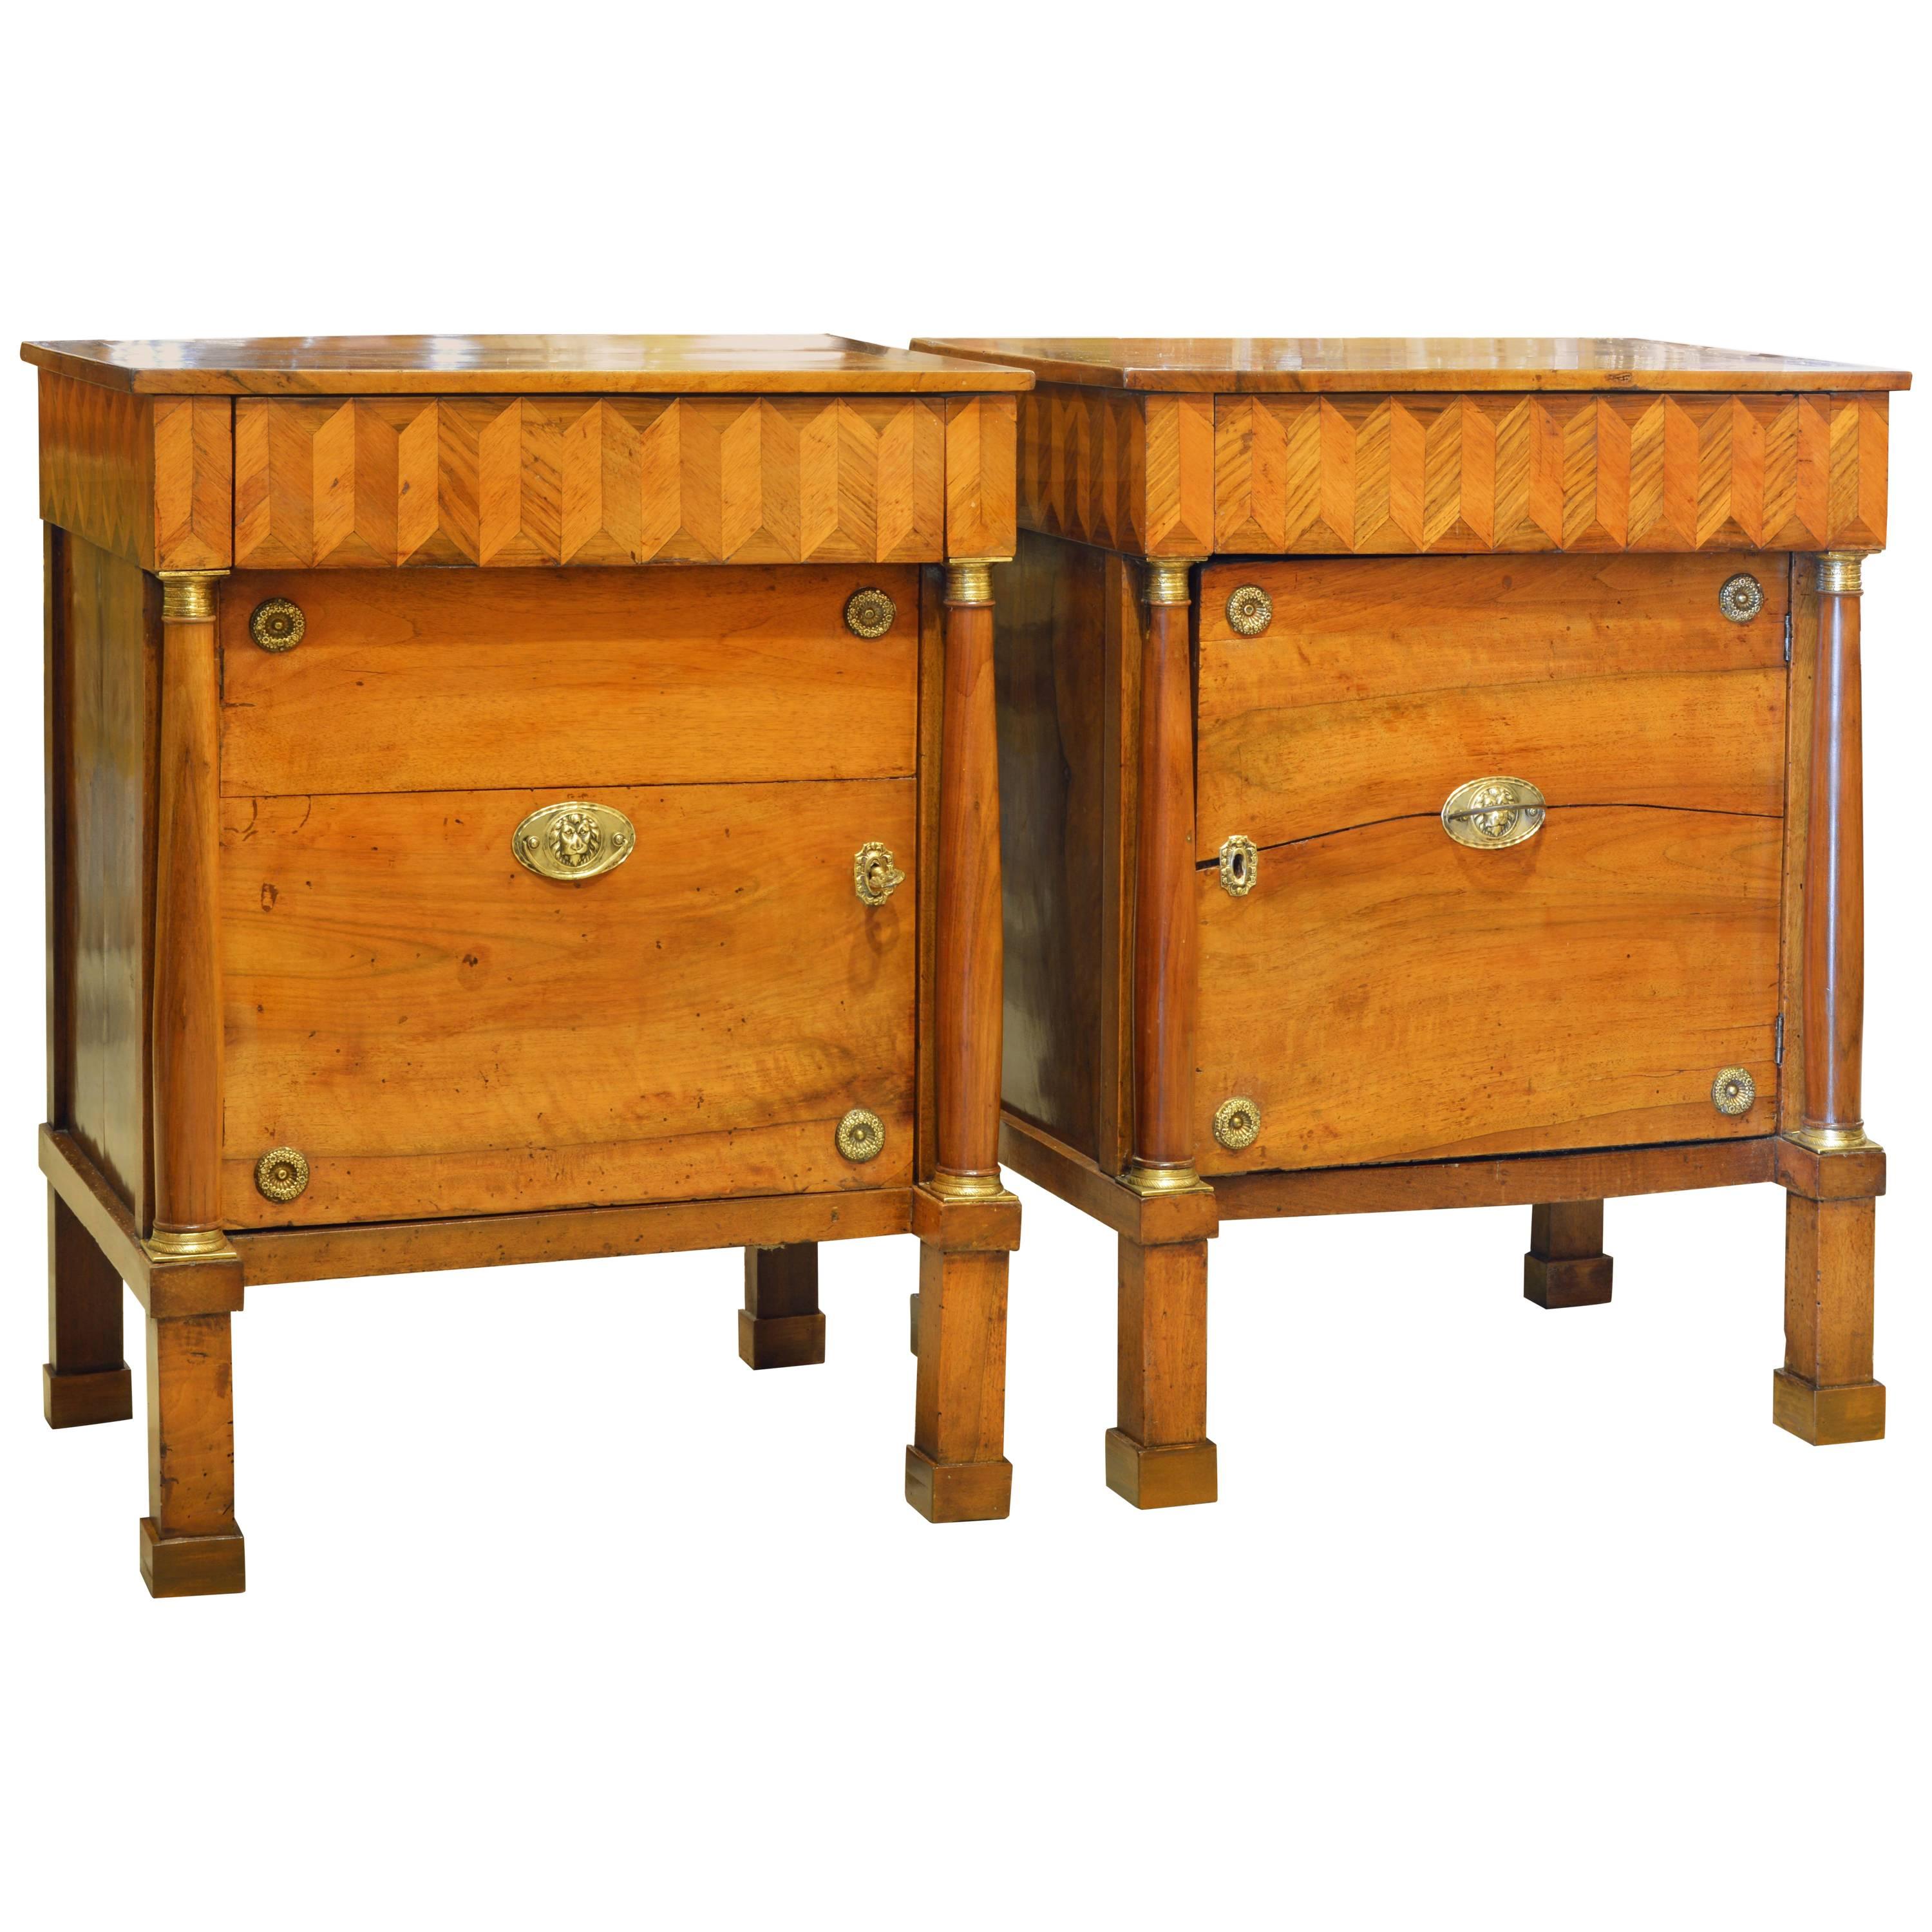 Pair of Early 19th Century Italian Neoclassical Parquetry Fruitwood Commodes